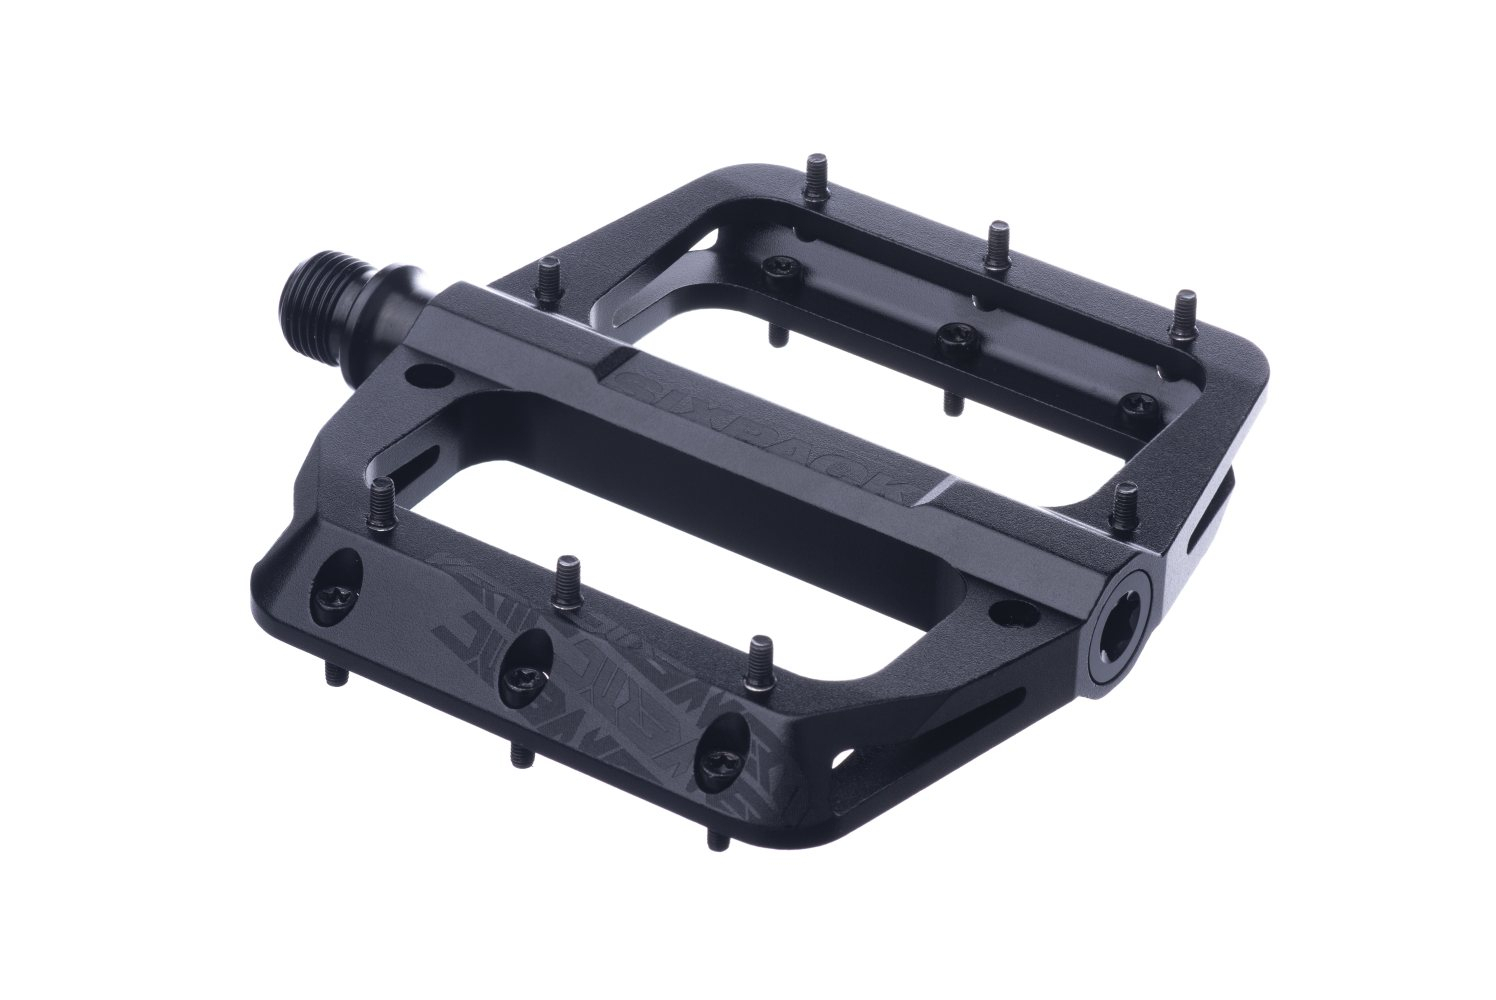 Sixpack Vertic 3.0 pedals stealth-black